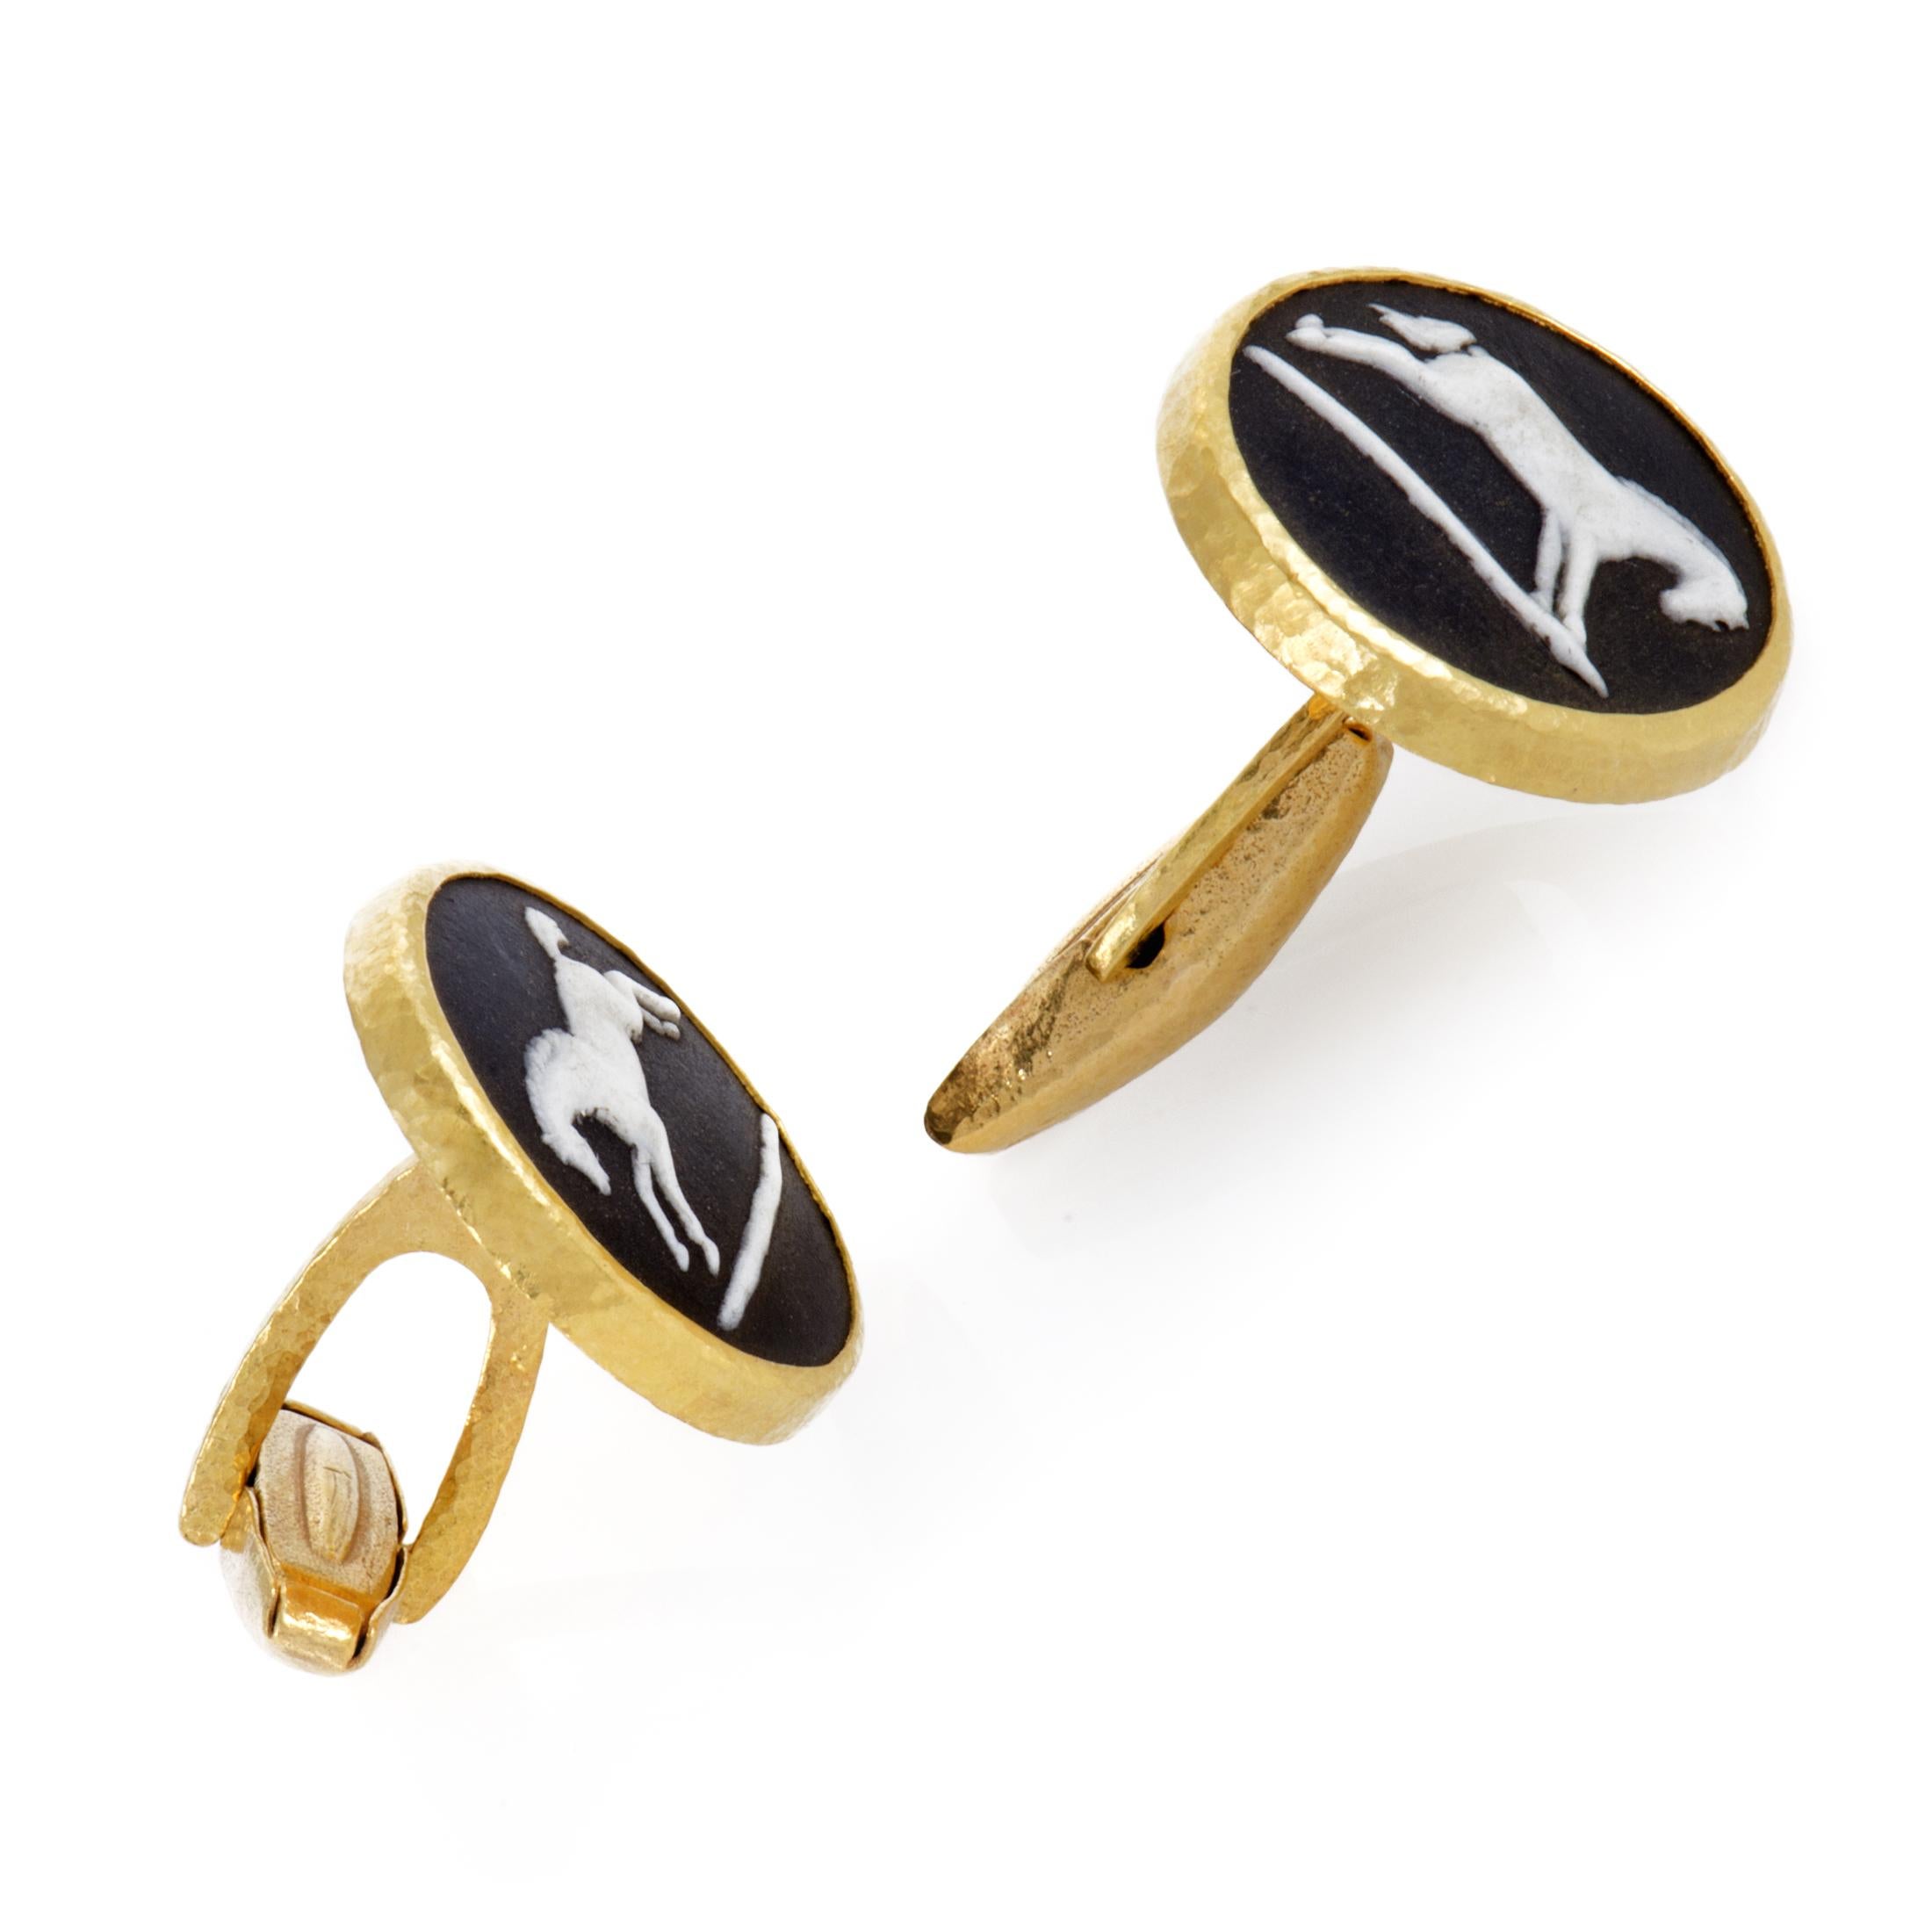 Majestic motifs of horses are presented in splendid Wedgwood china against the stunning black jasper stones in these exquisite cufflinks from Gurhan made of prestigious 24K yellow gold.
